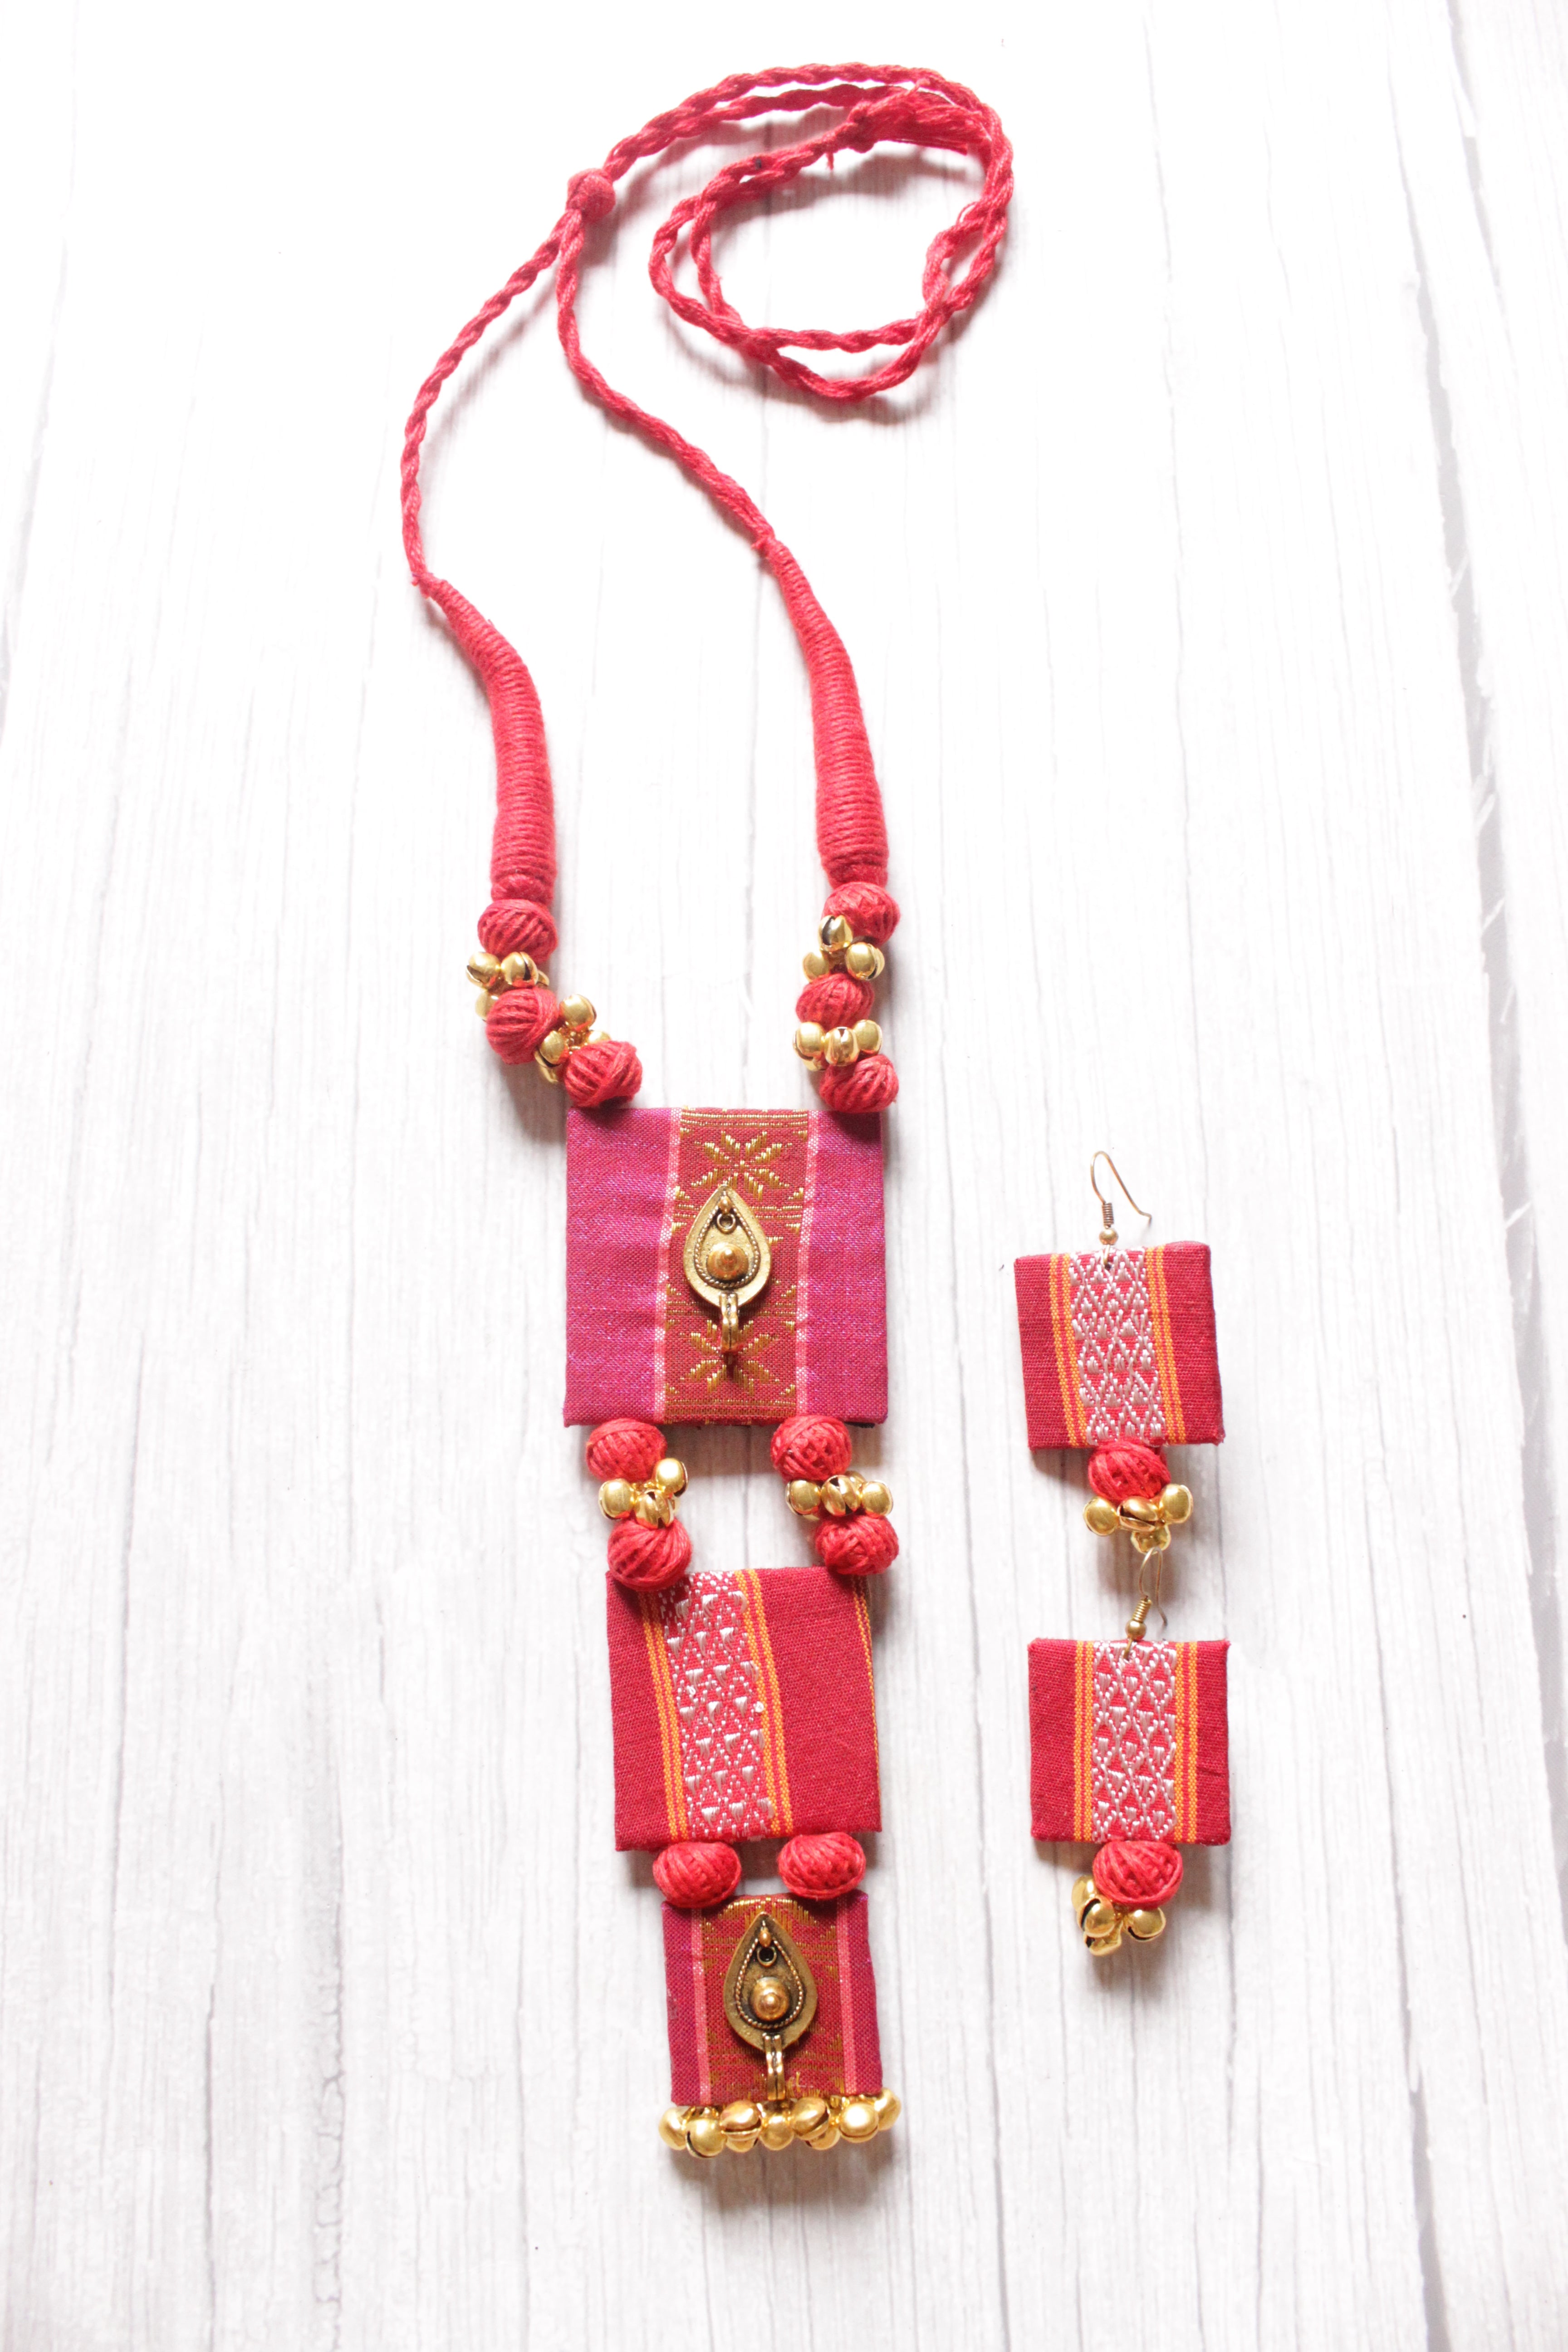 Fabric Handcrafted Ghungroo Embellished 3 Layer Pendant Choker Necklace Set with Adjustable Closure